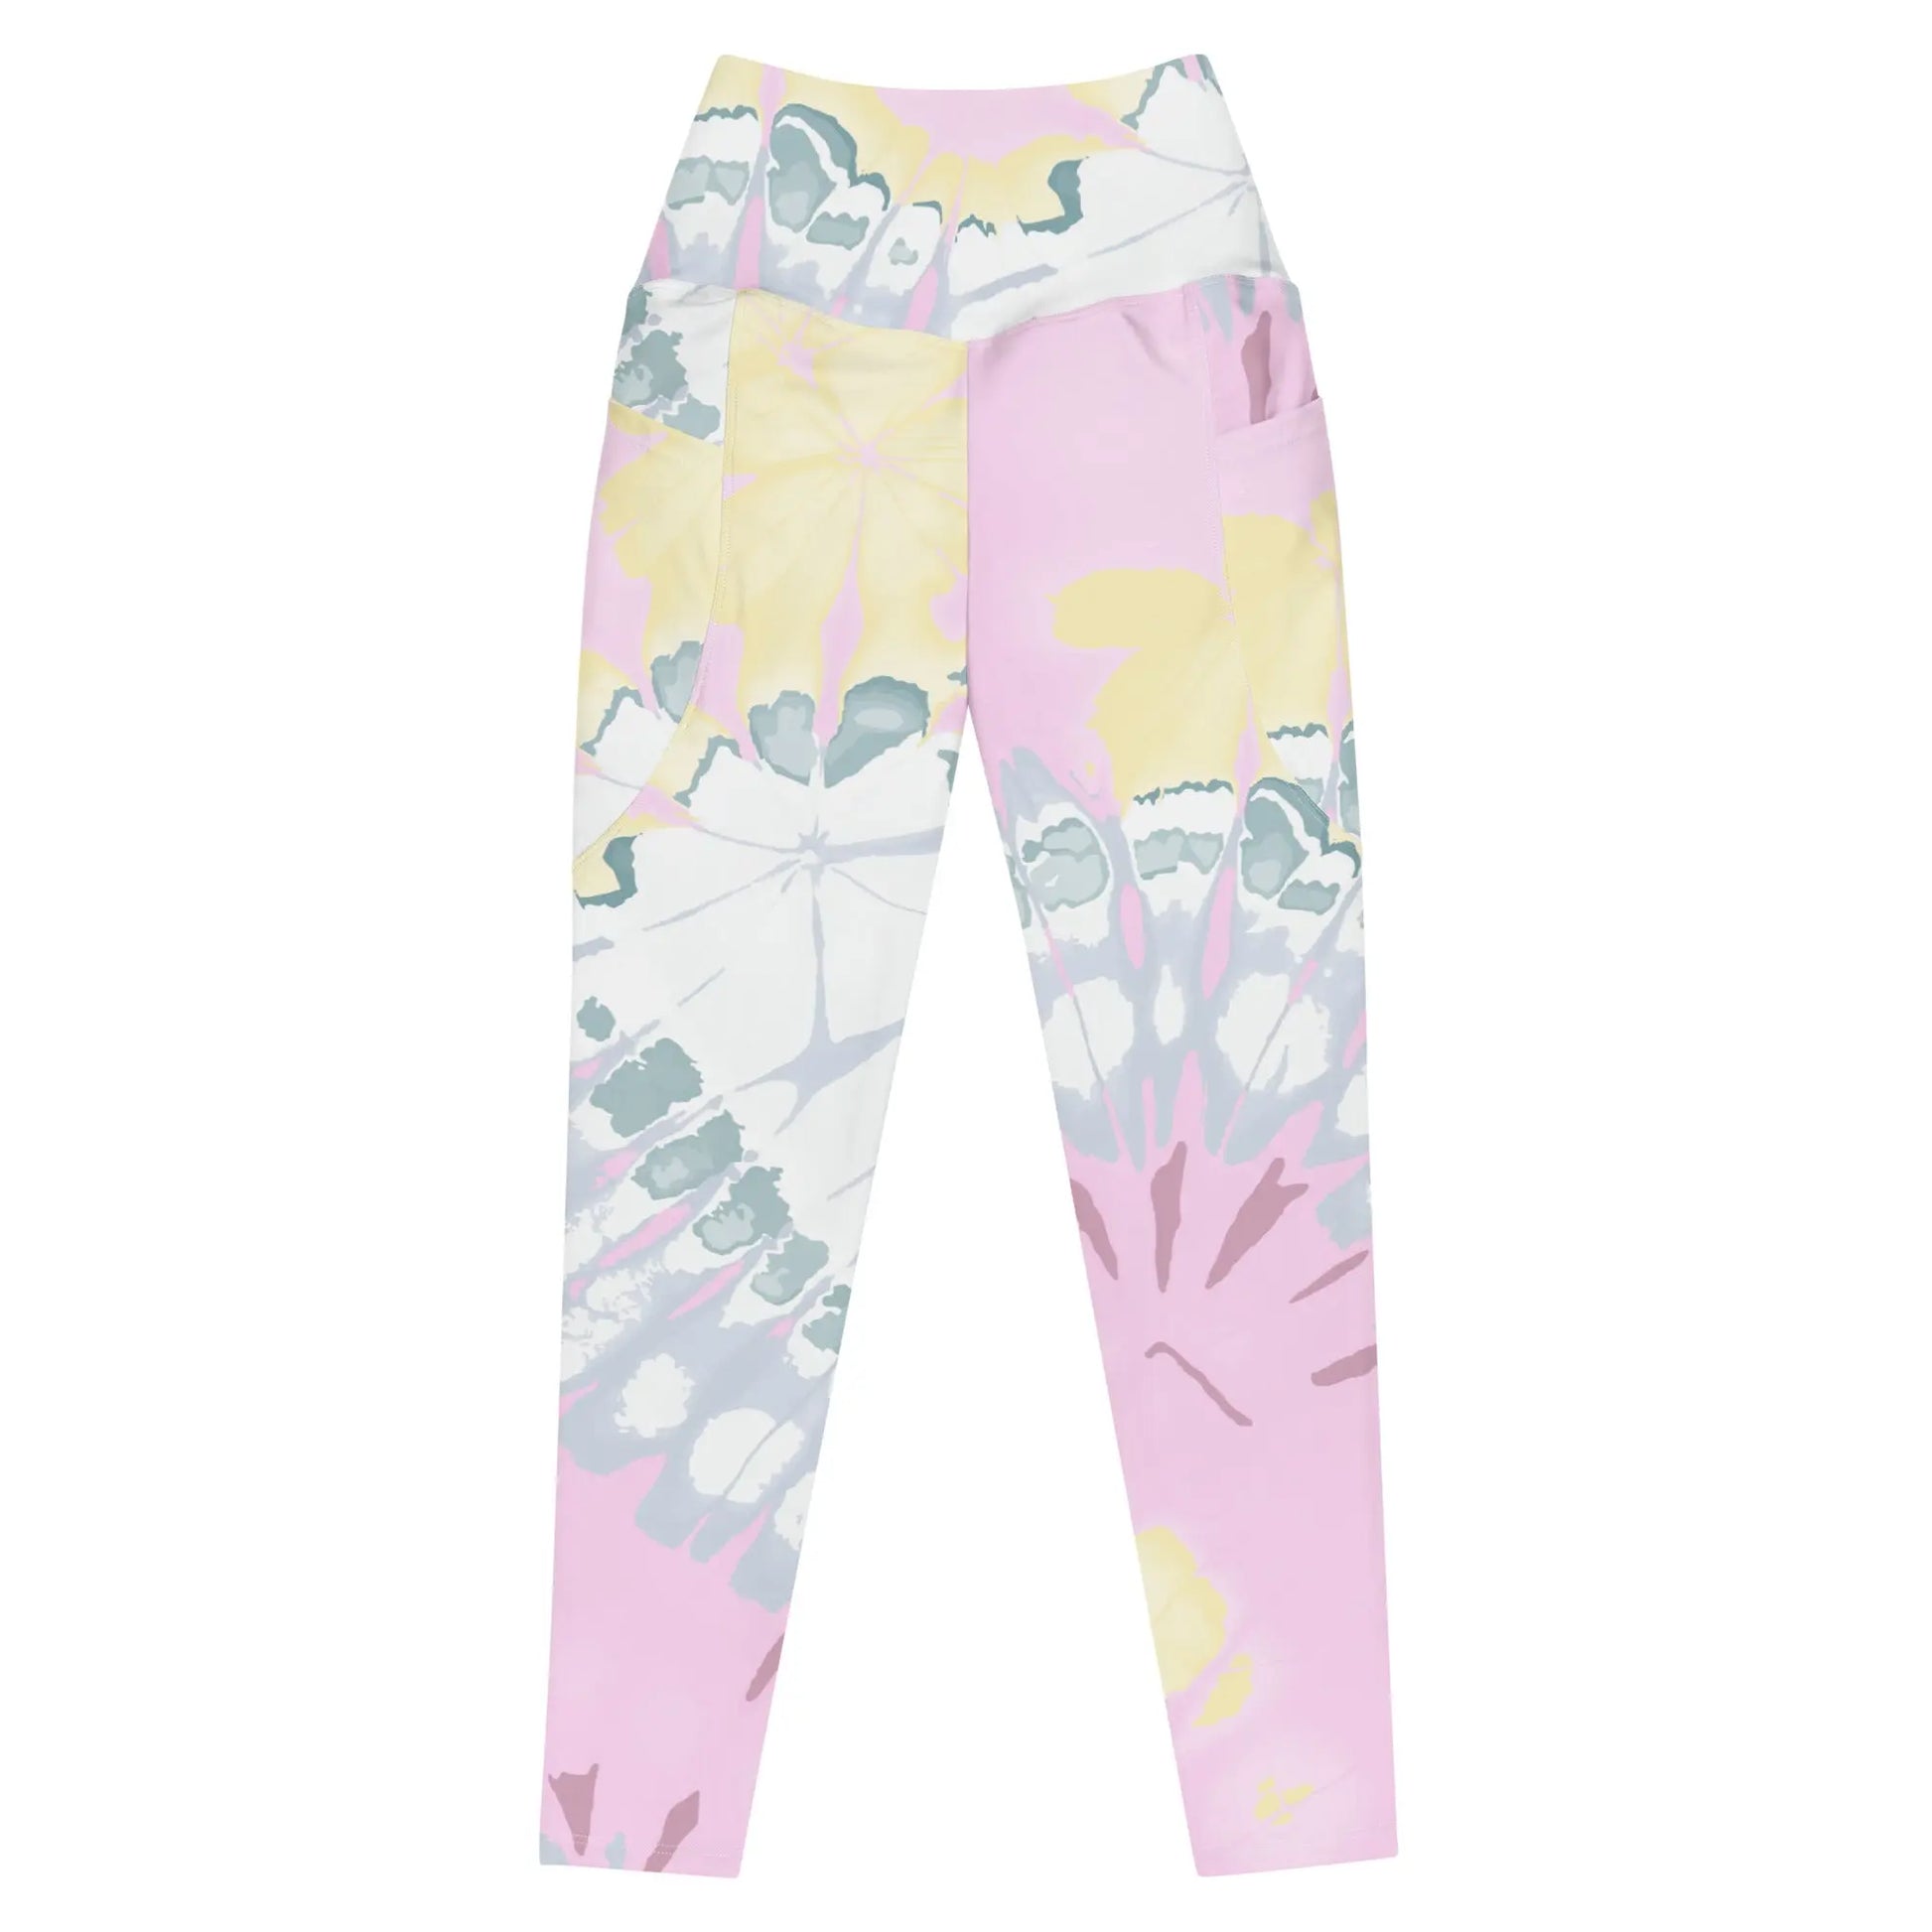 Softest.Recycled.Fabric.Printed.Leggings.with.Pockets.High.Waist.Front